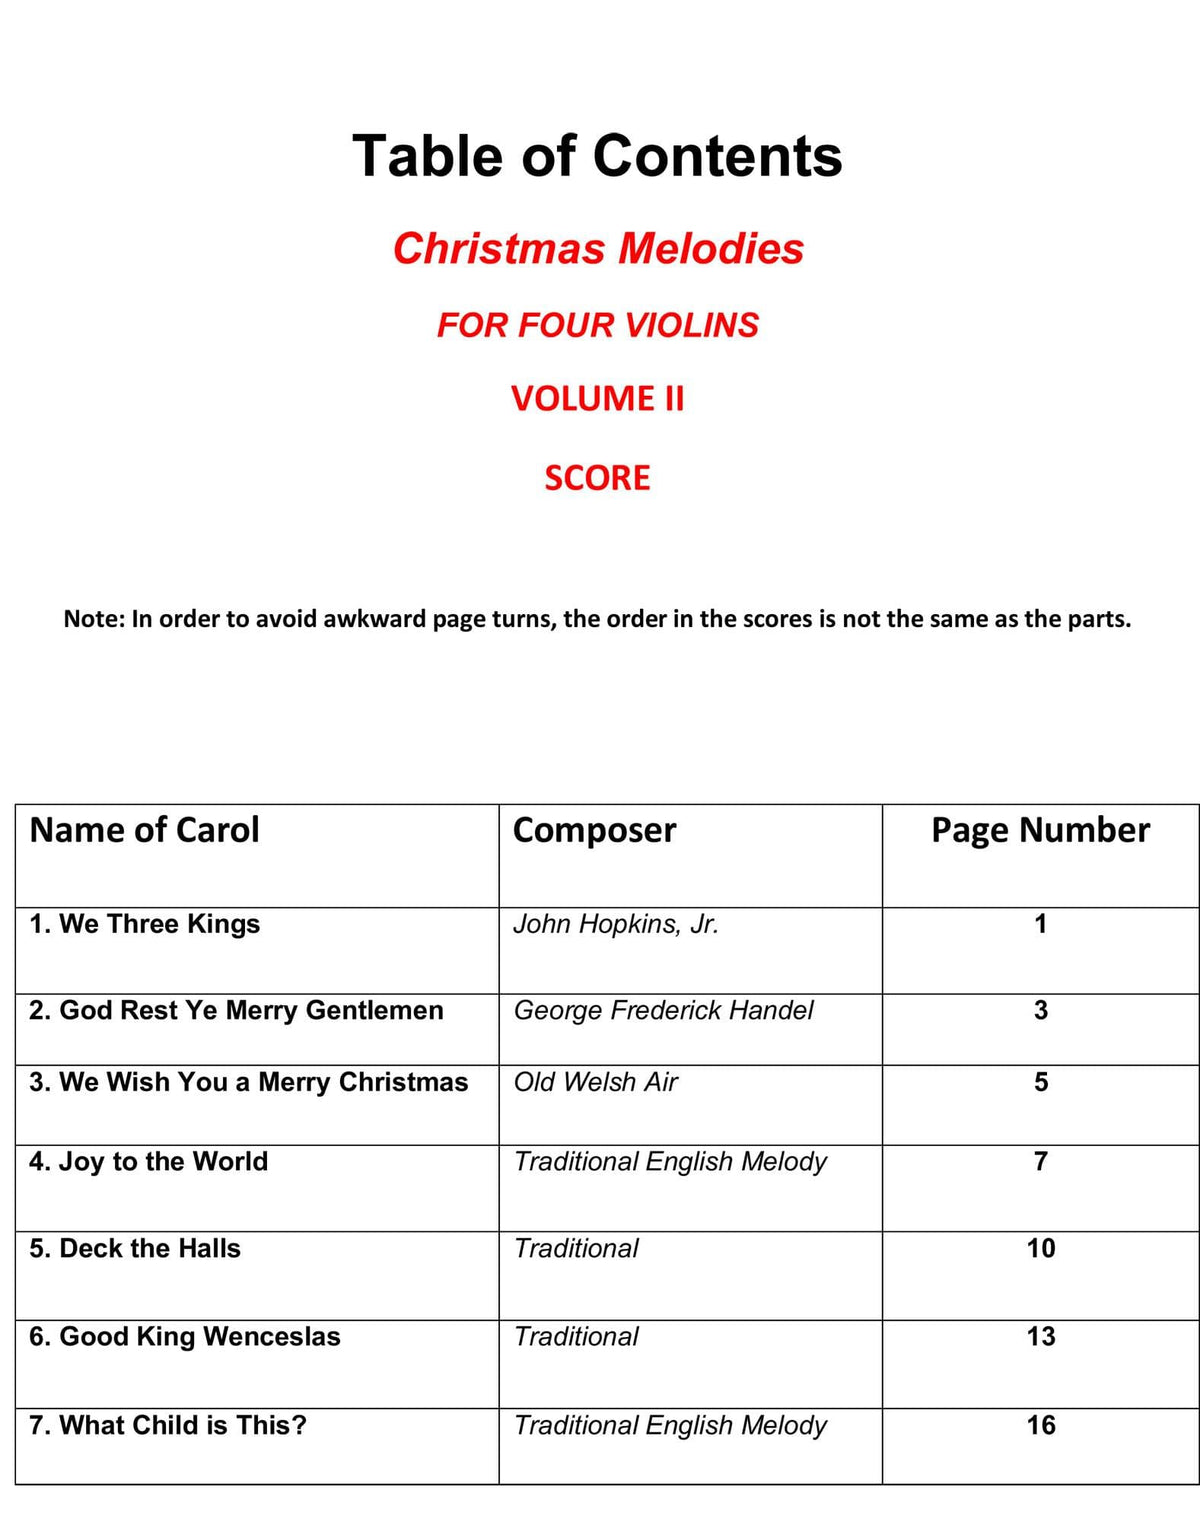 Yasuda - Christmas Melodies For 4 Violins, Volume II: Contemporary & Classical Arr. - Dig. Download